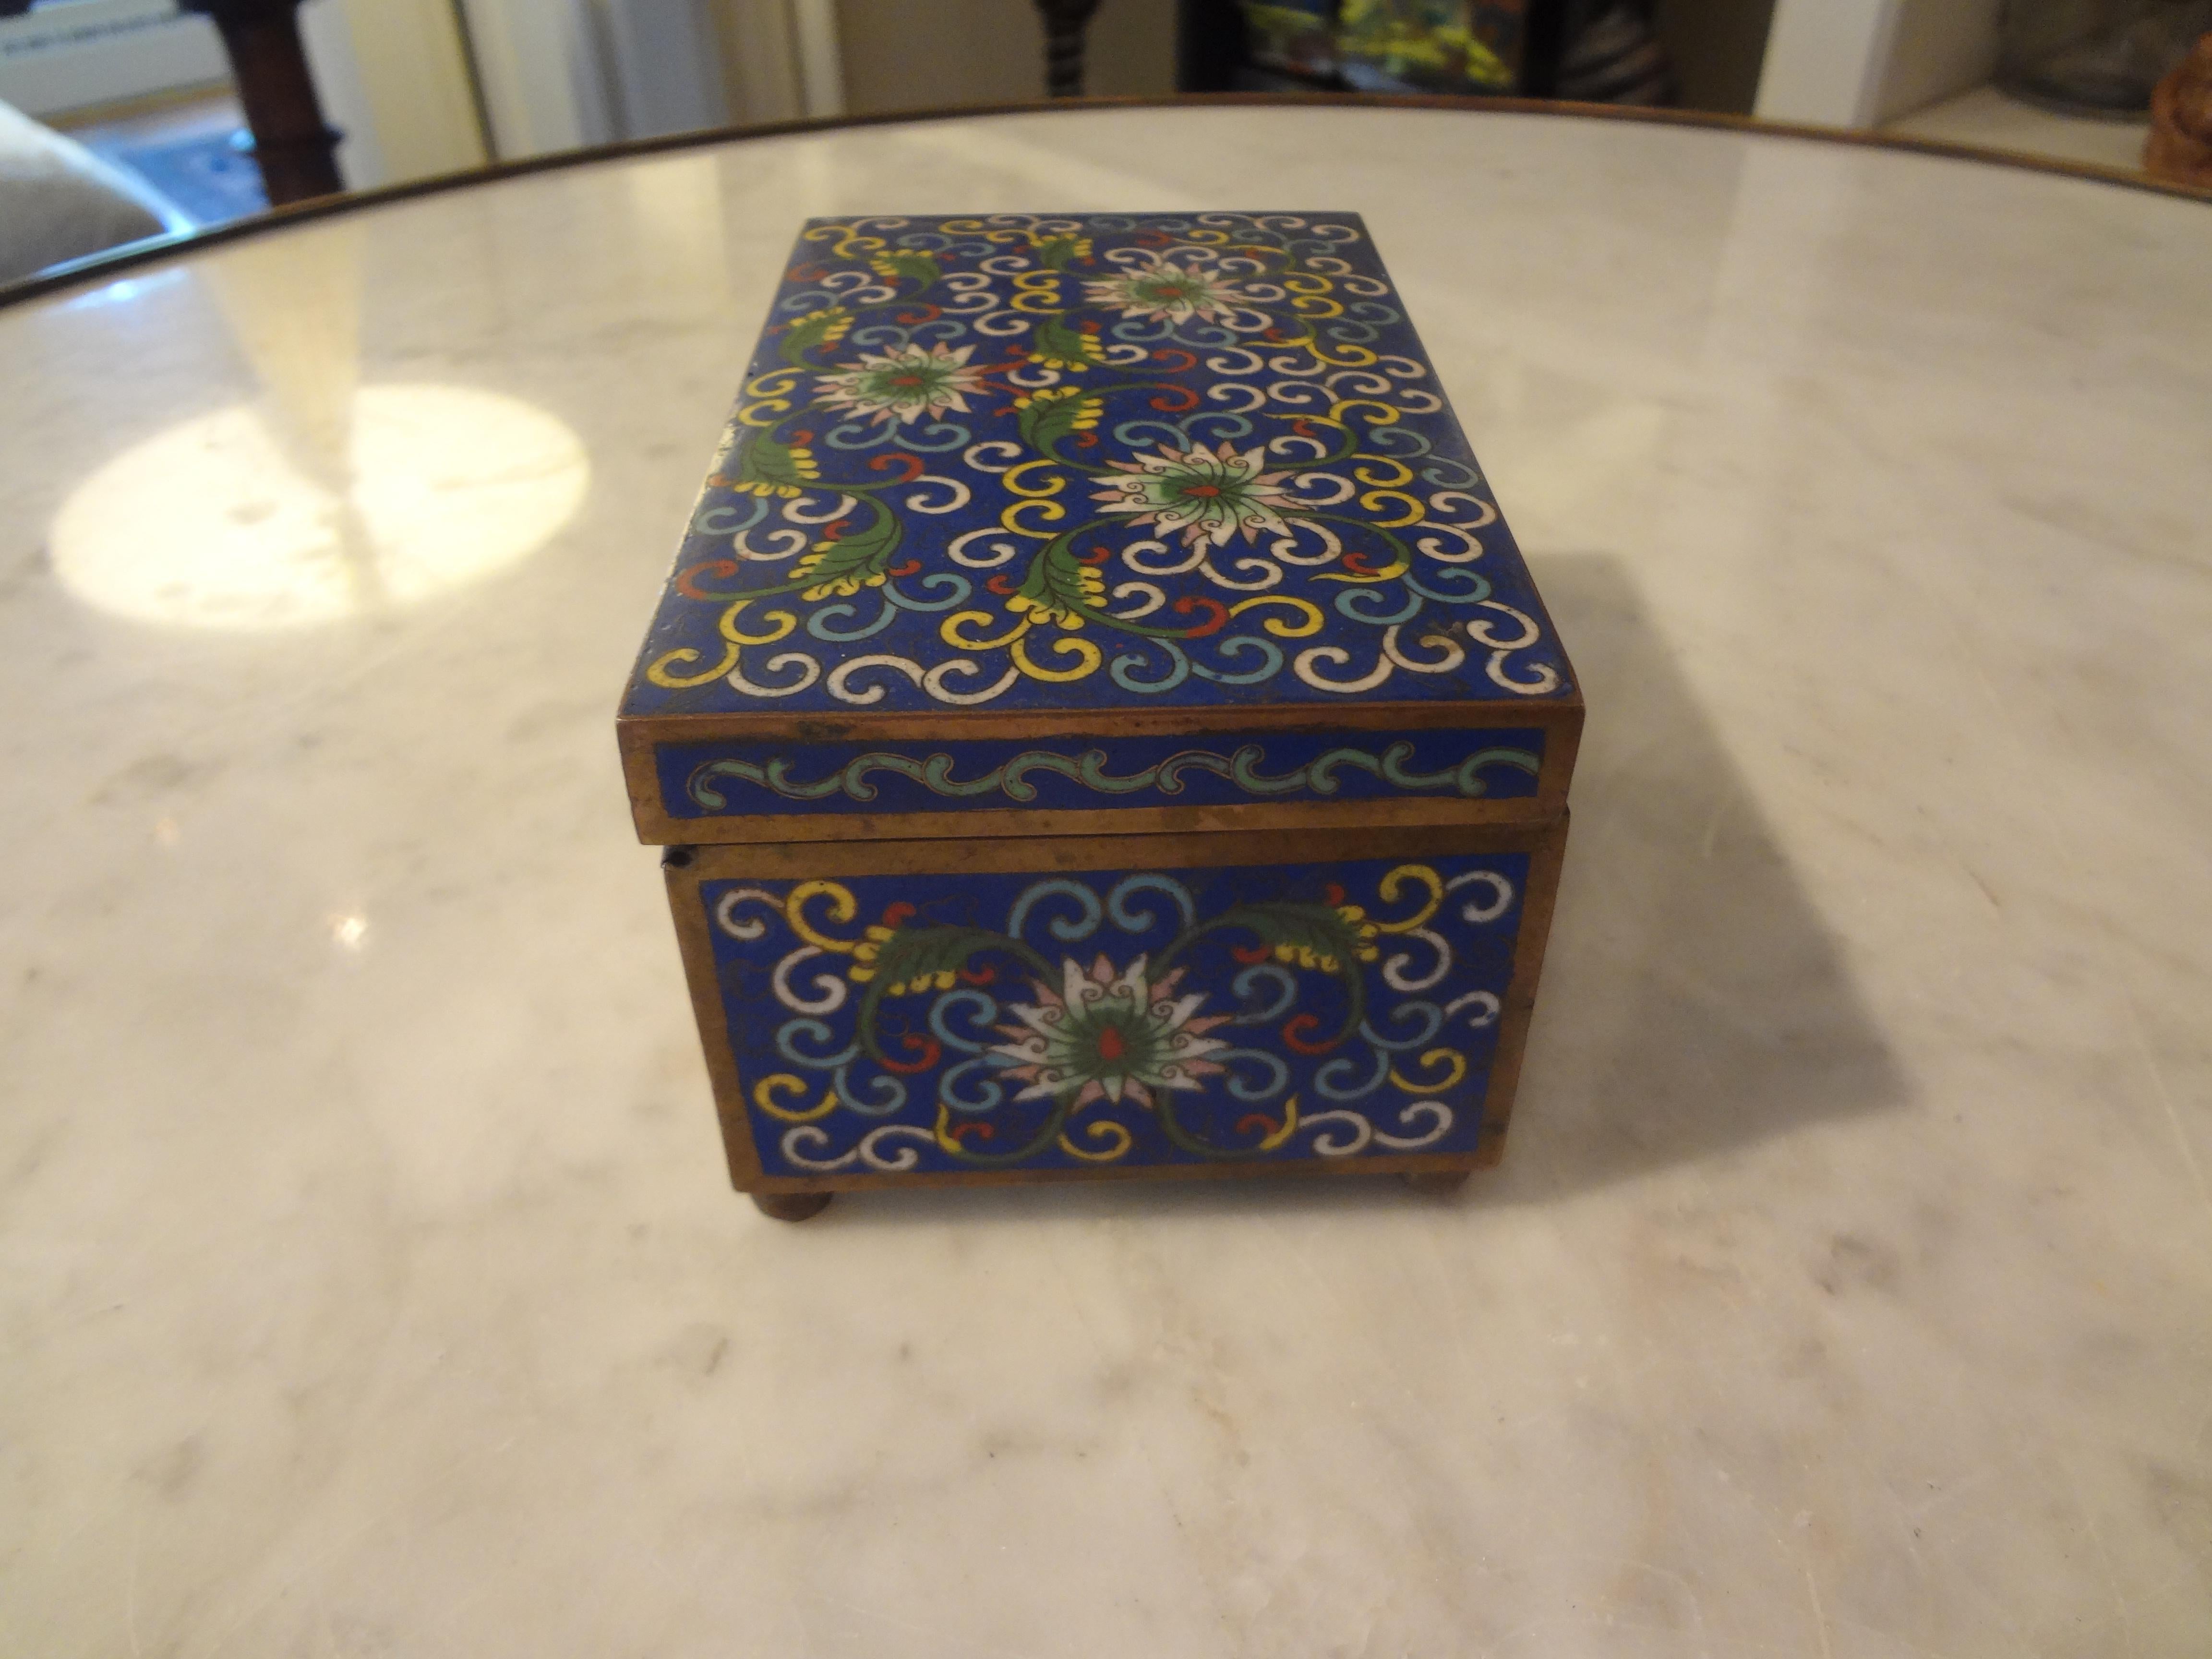 Early 20th Century Chinese Export Cloisonné Box, Stamped China